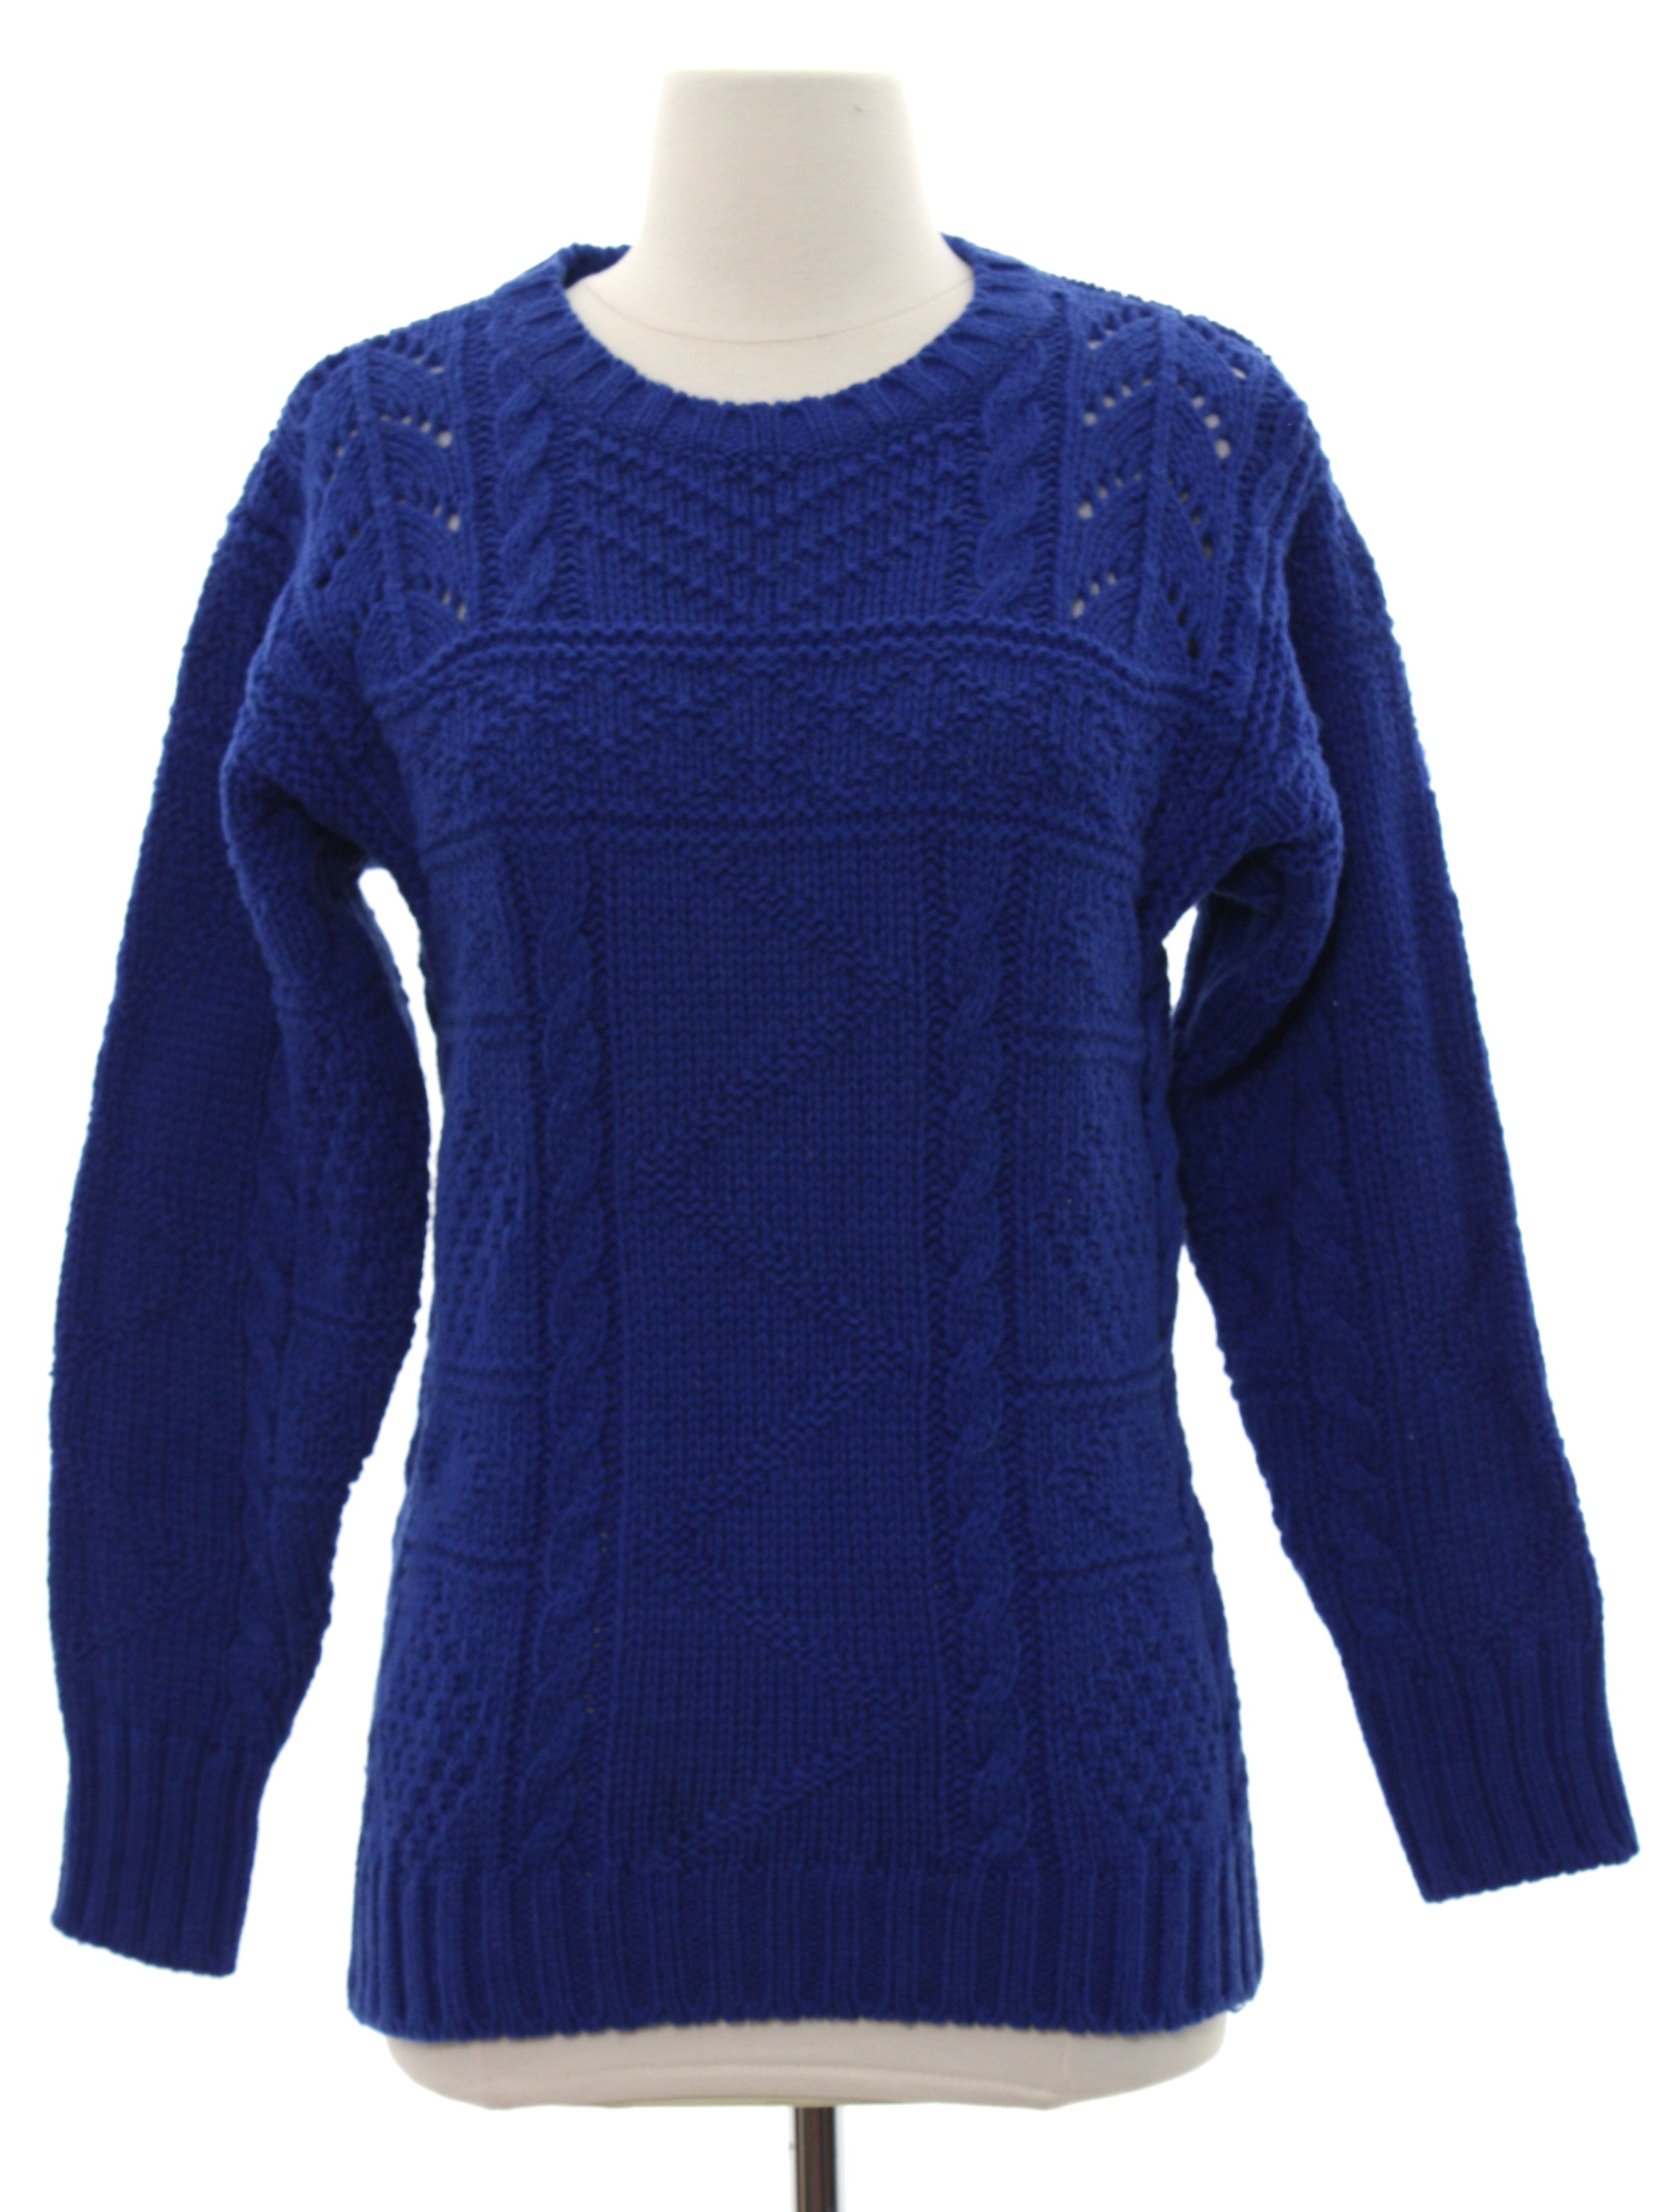 Vintage 1980's Sweater: 80s -Cambridge- Womens blue background wool ...